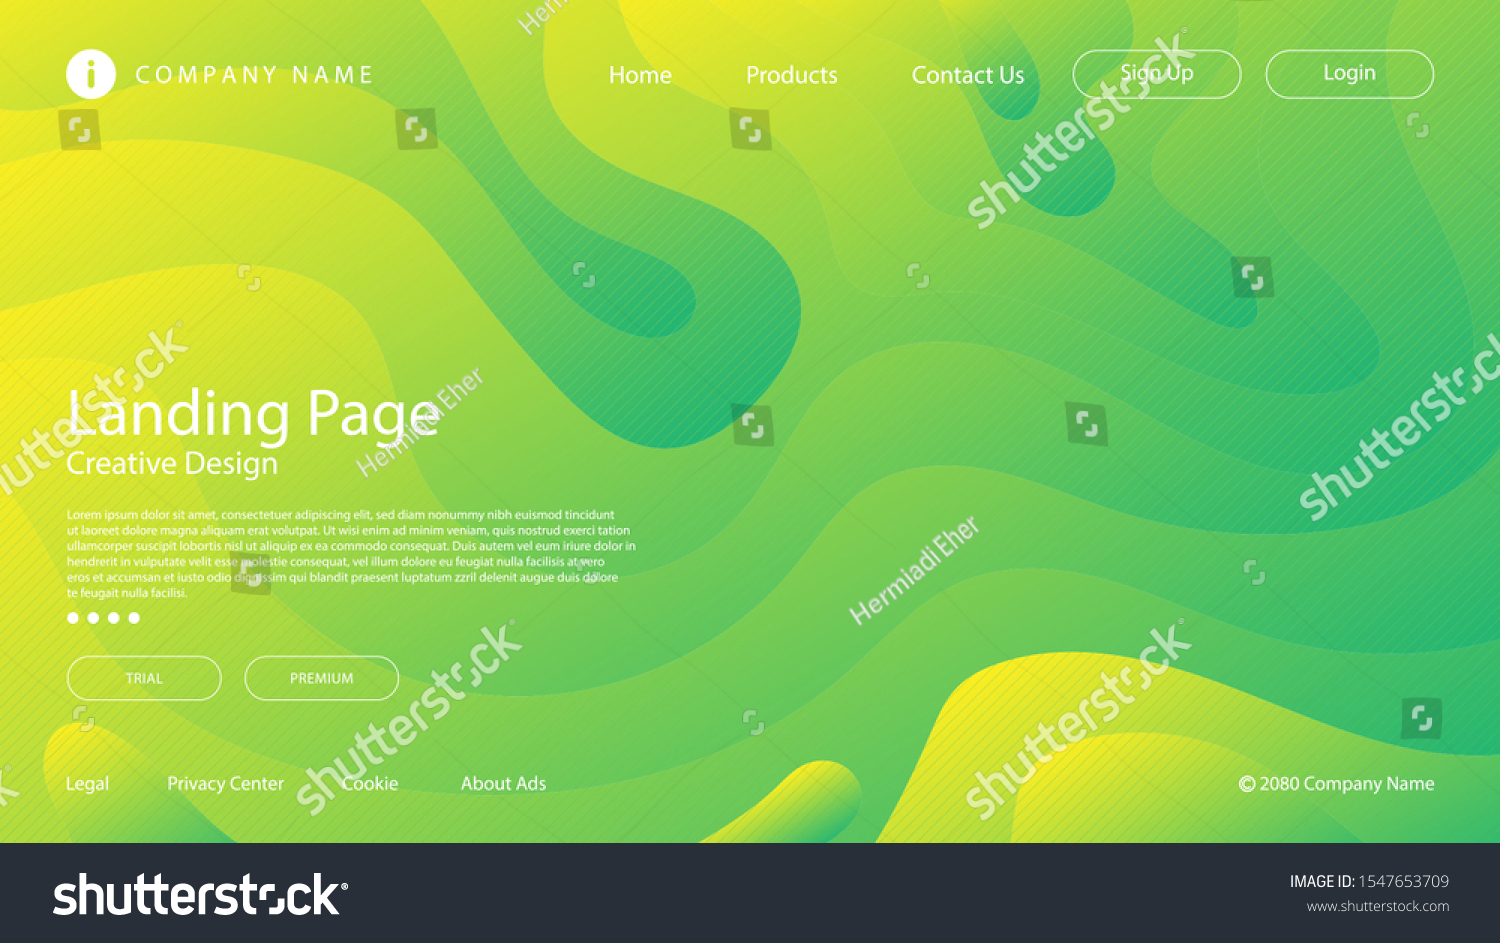 3,282,143 Green Background Banner Images, Stock Photos & Vectors ...